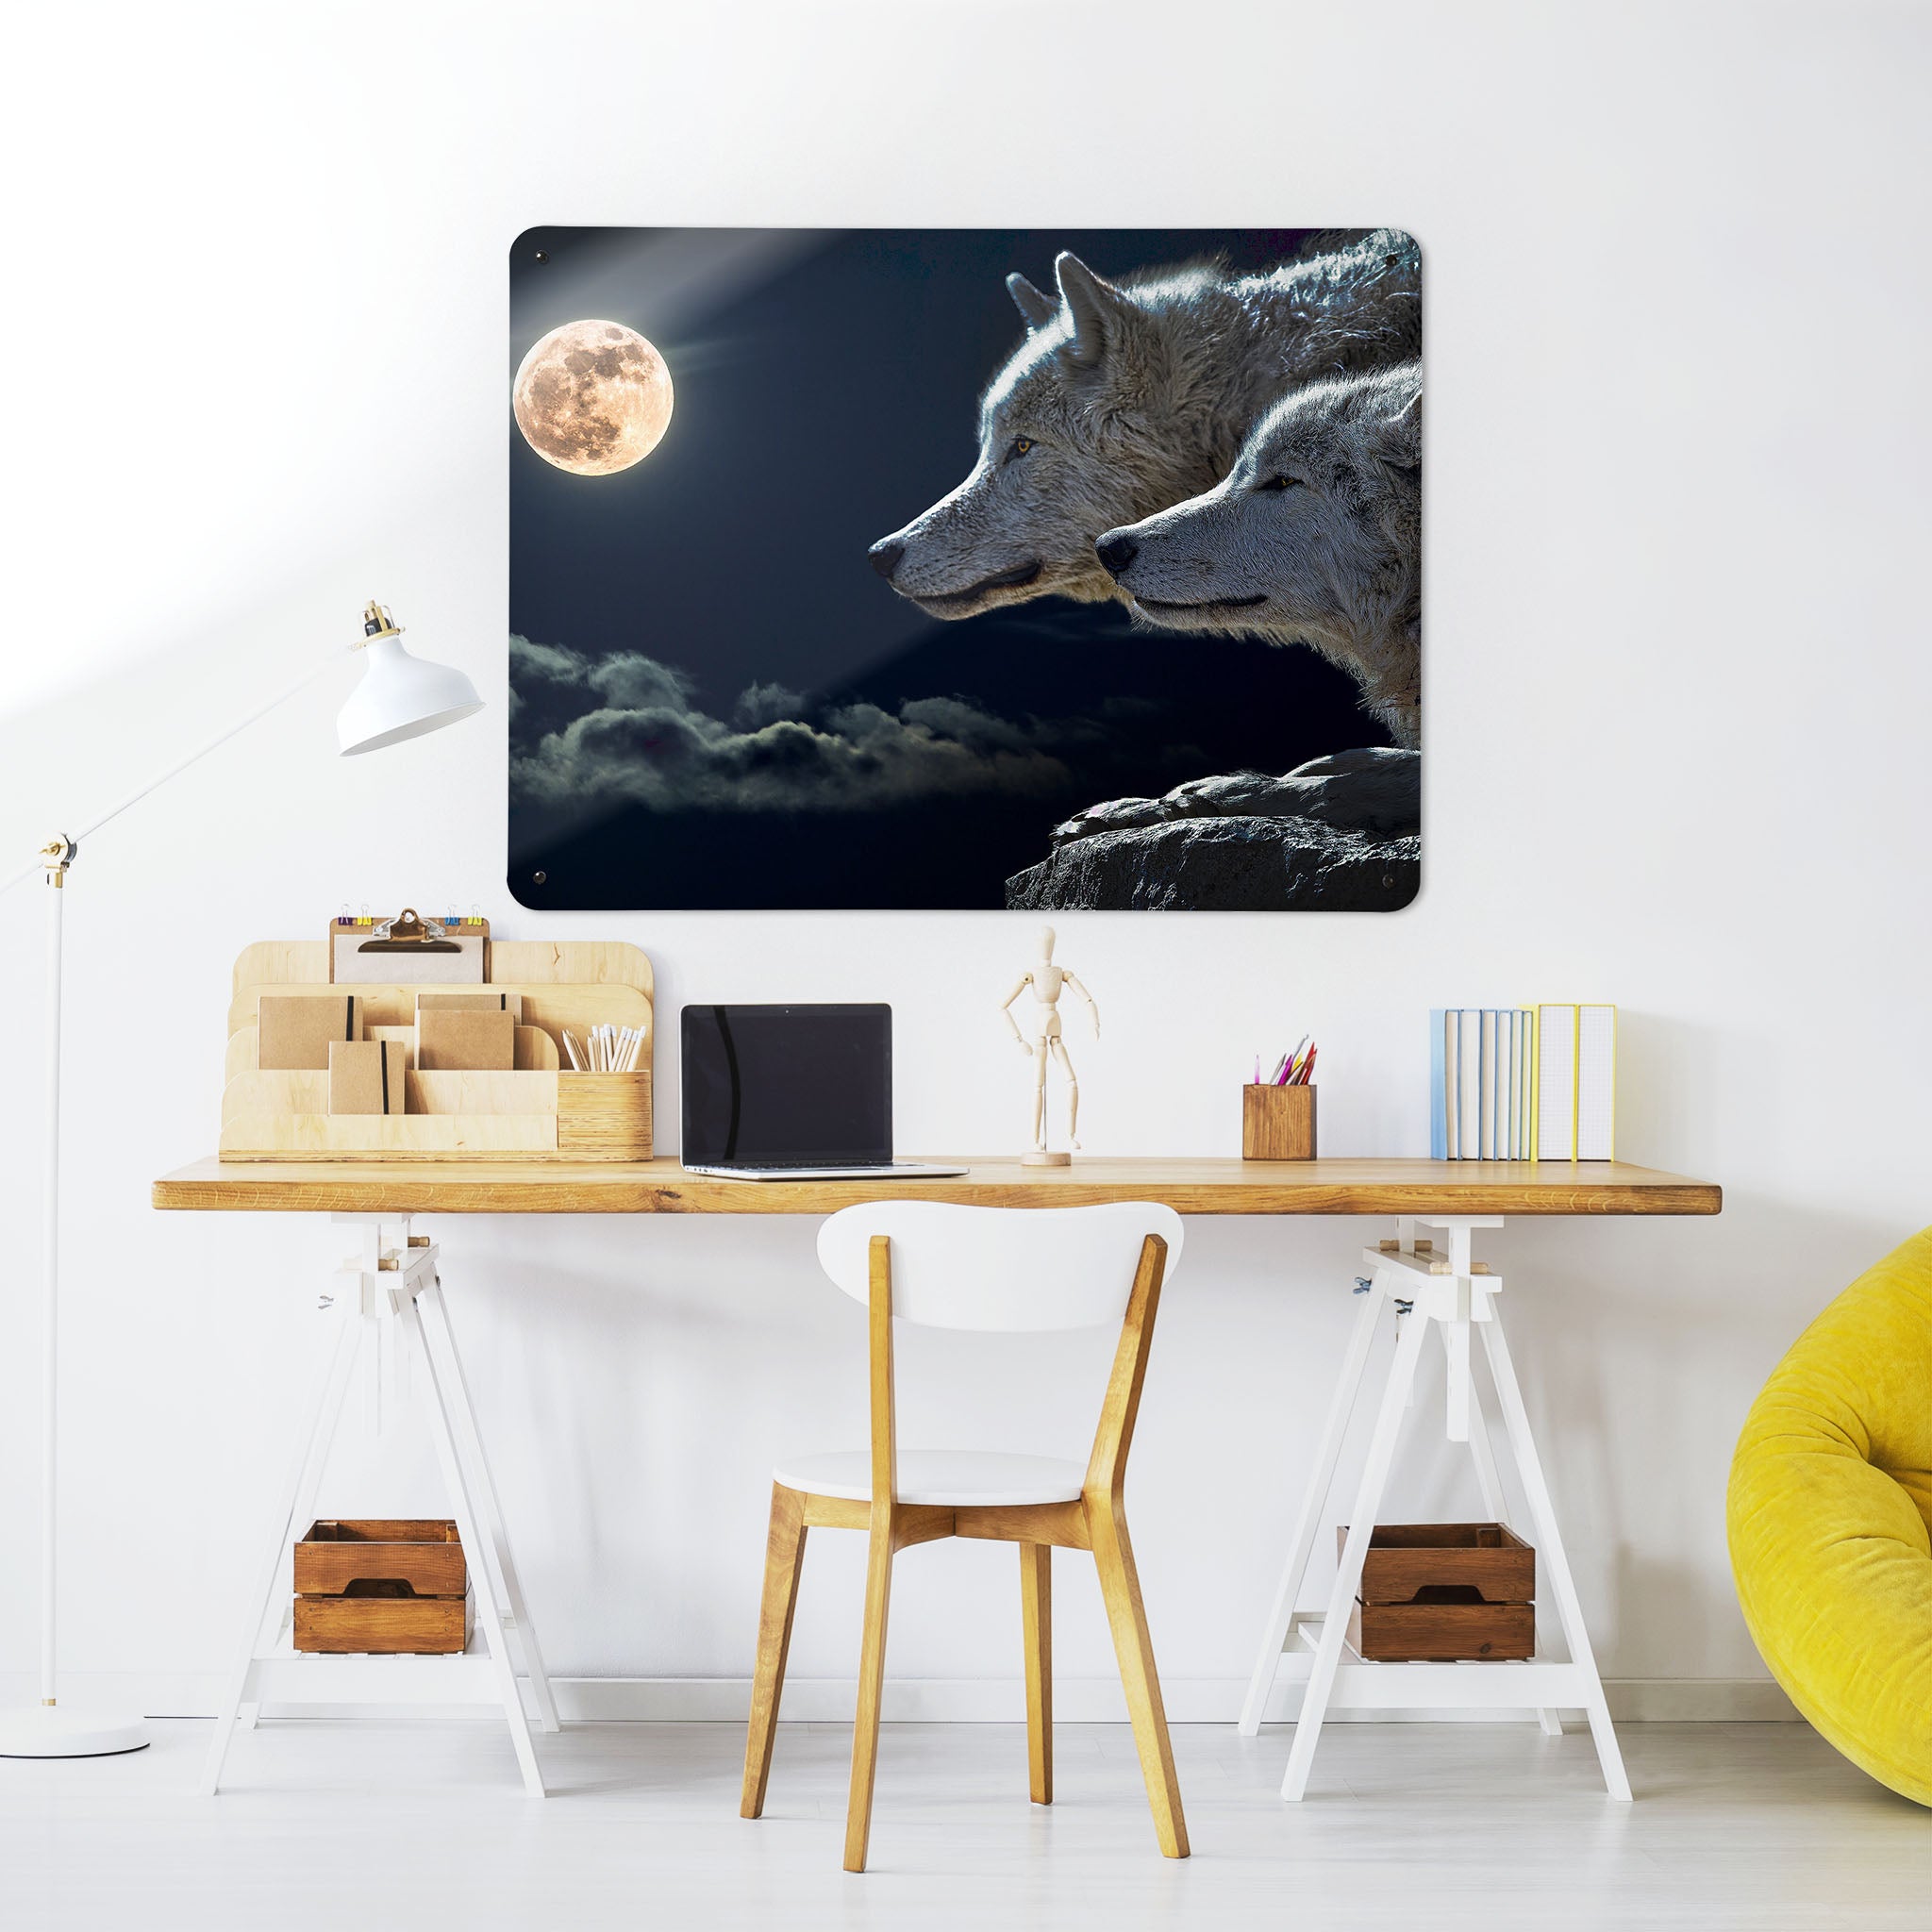 A desk in a workspace setting in a white interior with a magnetic metal wall art panel showing a photographic image of two wolves with a night sky and full moon